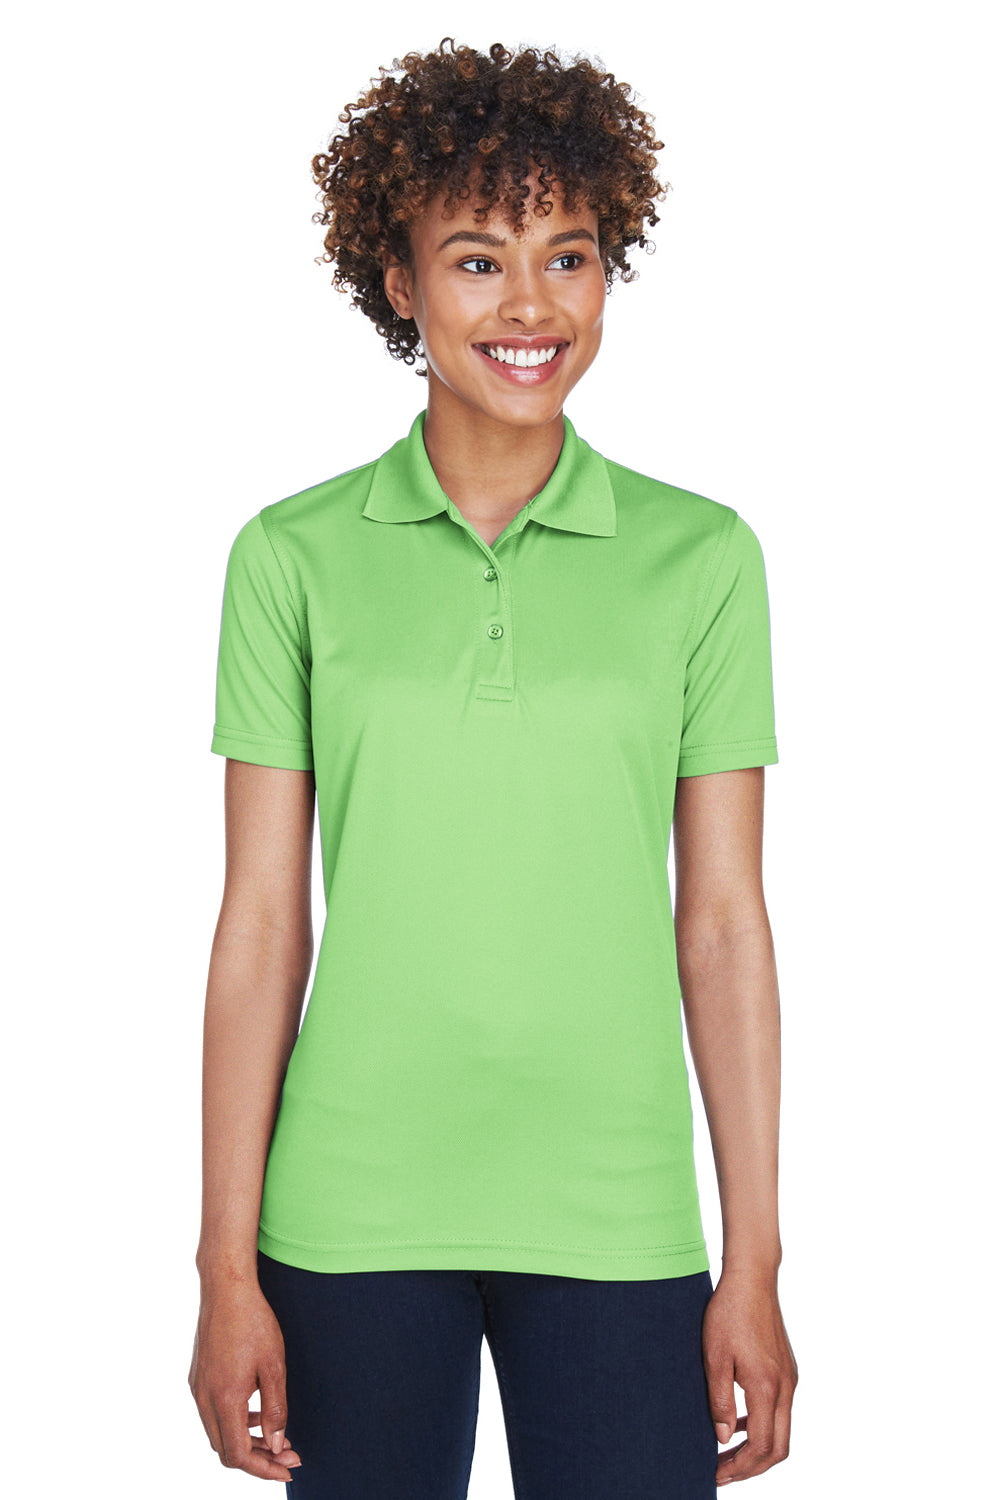 UltraClub 8210L Womens Cool & Dry Moisture Wicking Short Sleeve Polo Shirt Light Green Front